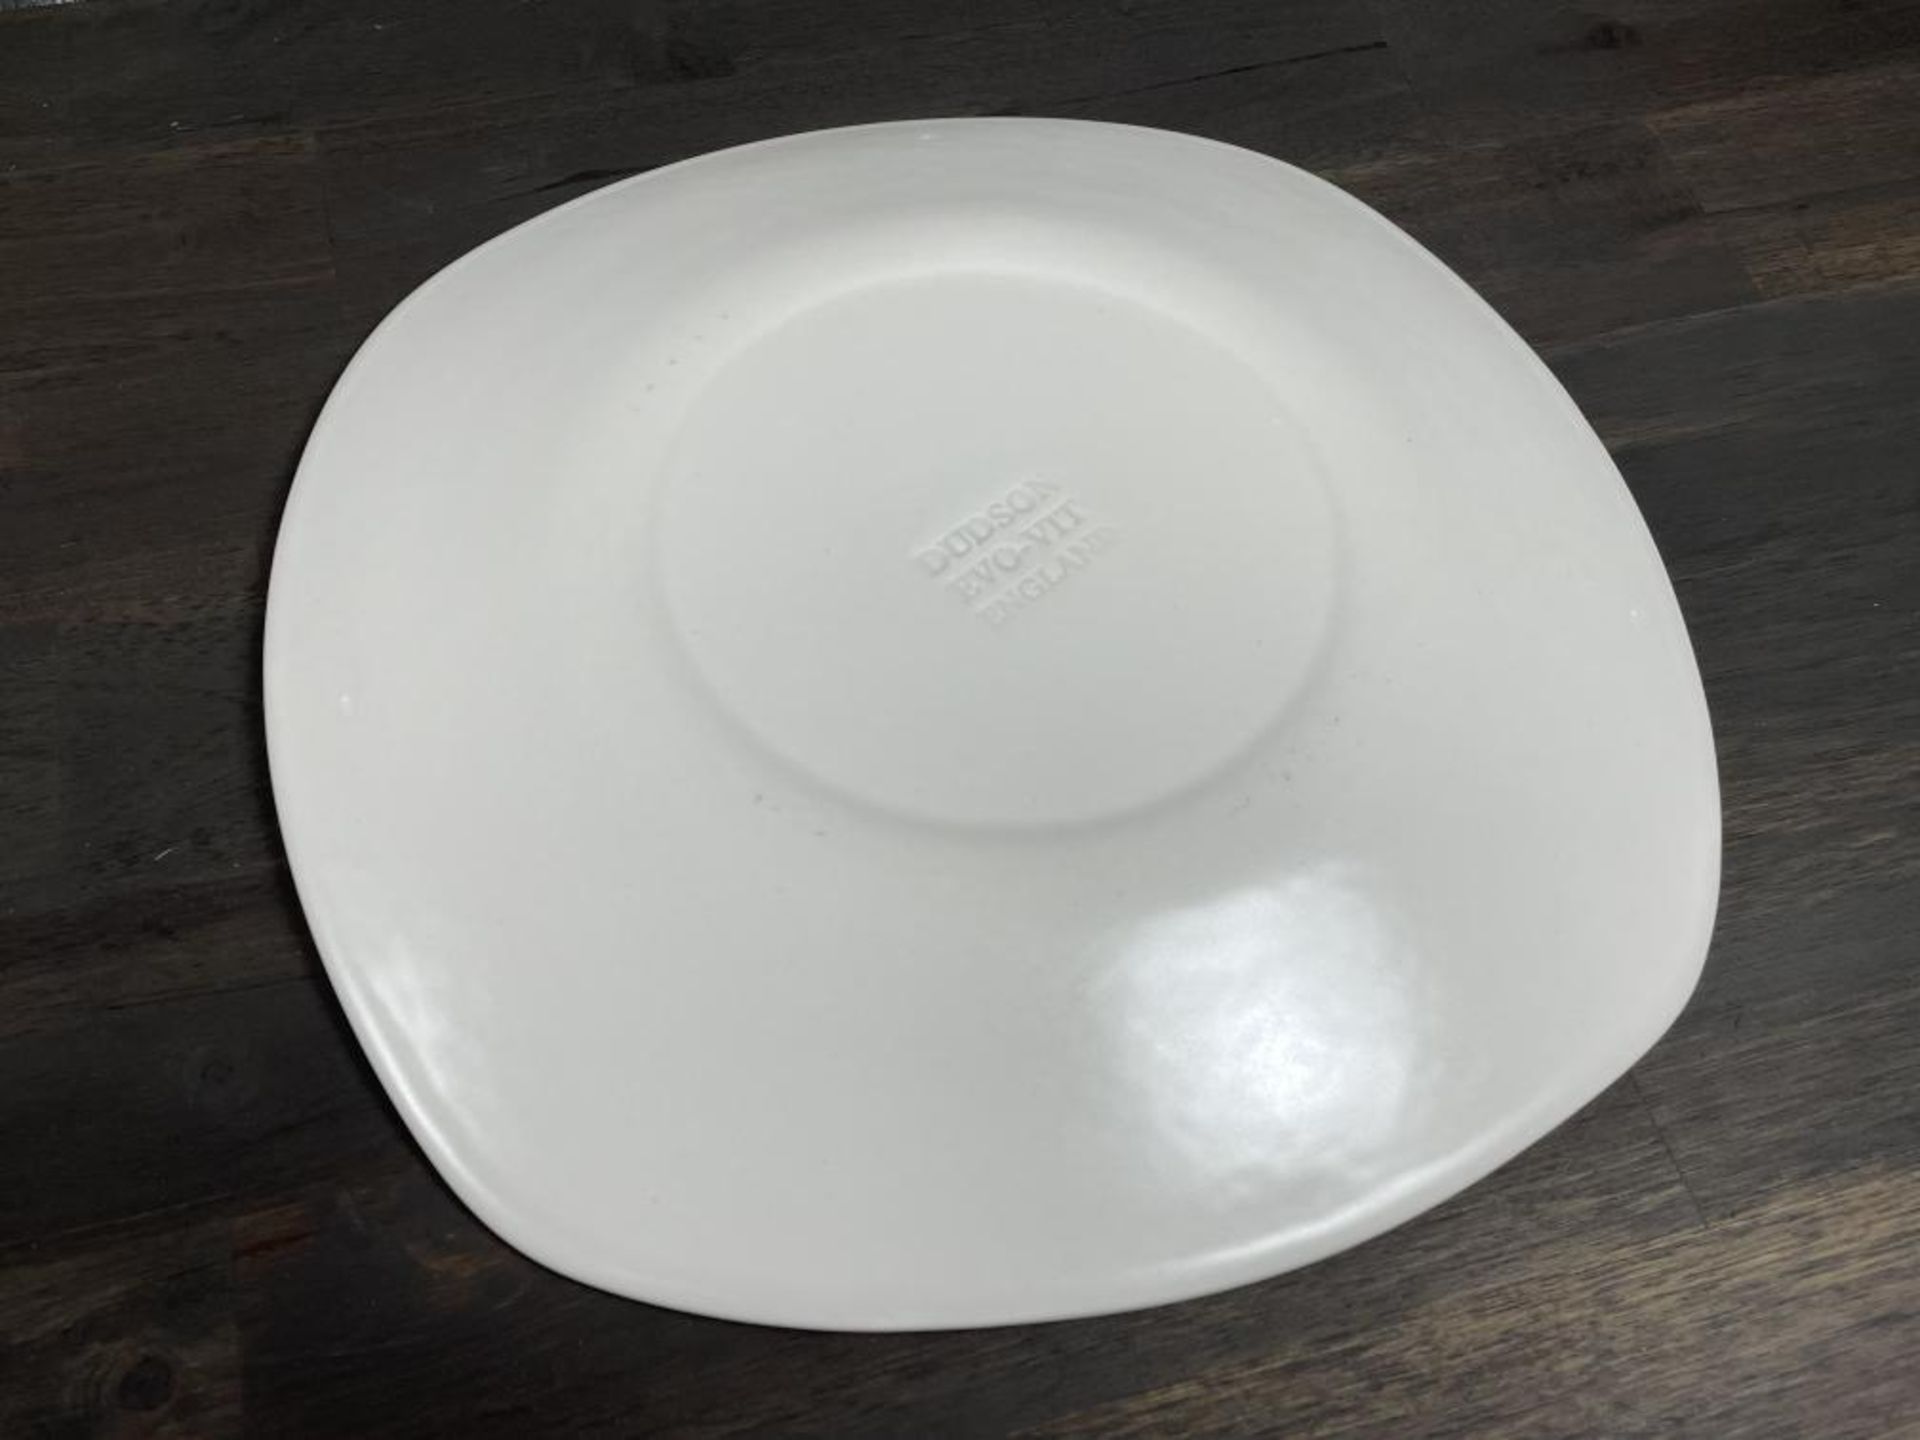 EVO PEARL 10-3/8" SQUARE CHEF'S PLATES - LOT OF 24 - Image 3 of 4